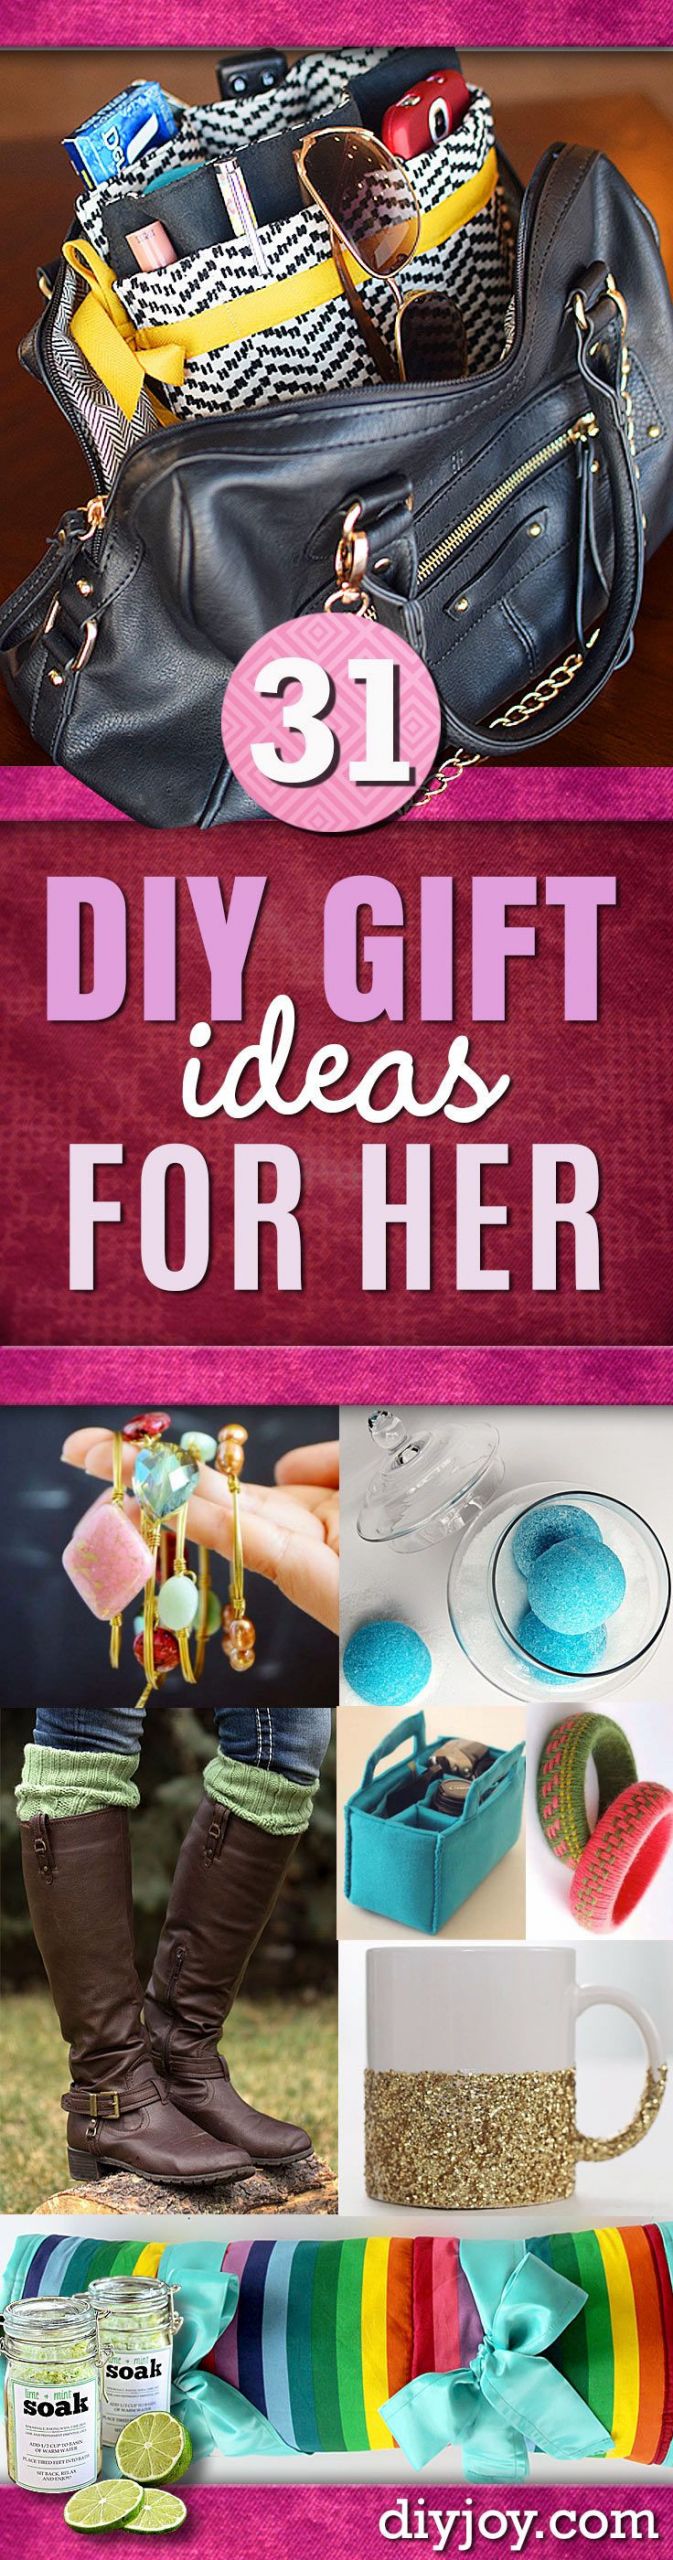 Homemade Christmas Gift Ideas For Girlfriend
 Super Special DIY Gift Ideas for Her DIY JOY